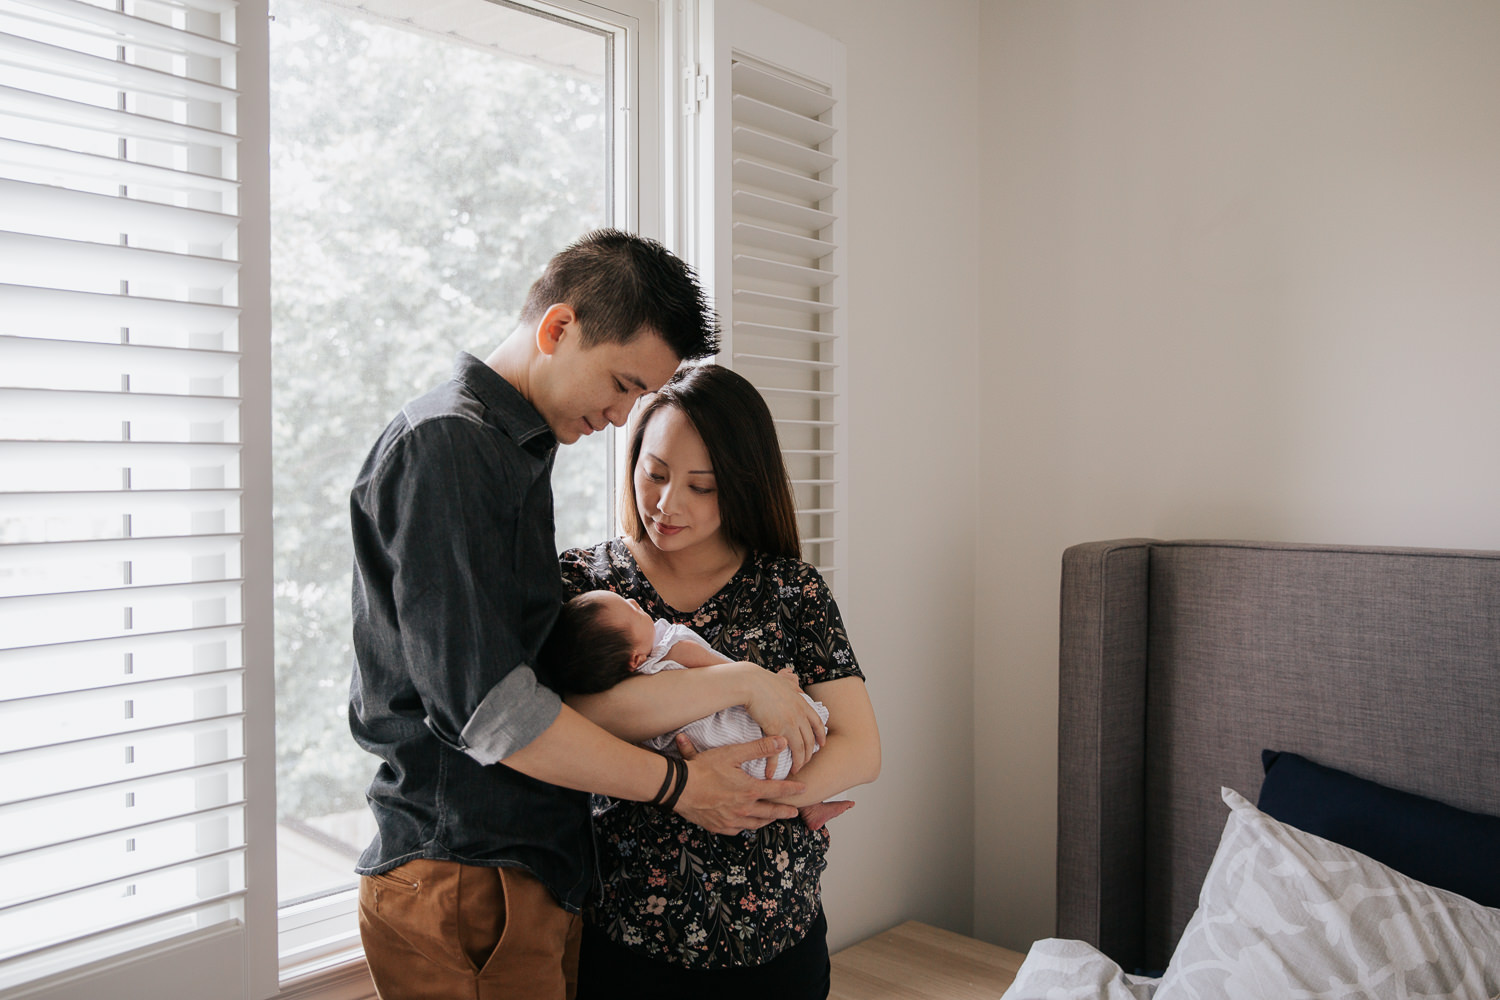 mom and dad standing in front of window holding sleeping 2 week old baby girl with dark hair in purple outfit, mother holding baby, father embracing them - Newmarket In-Home Photography